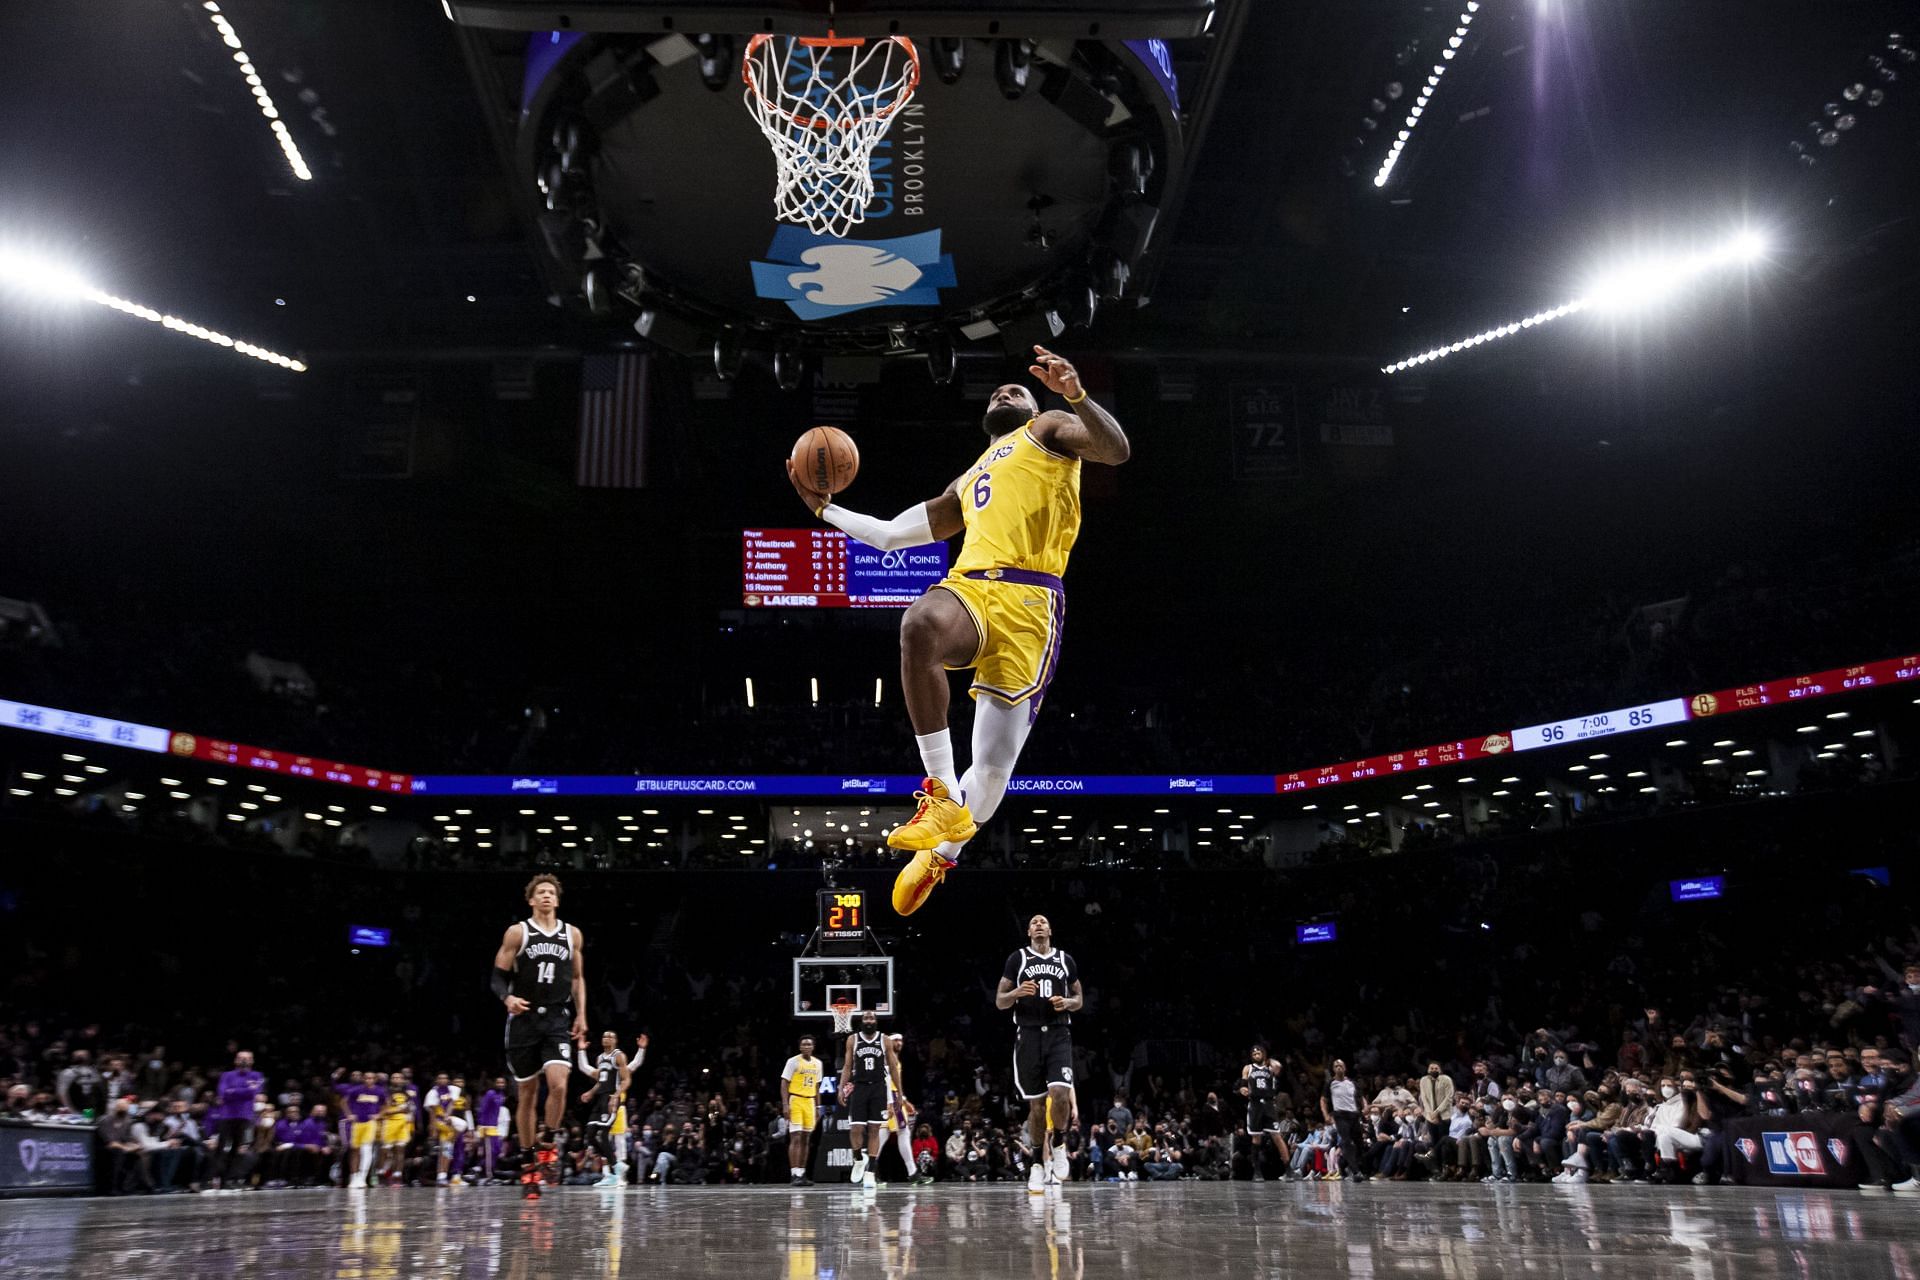 LeBron James #6 of the LA Lakers dunks against the Brooklyn Nets.